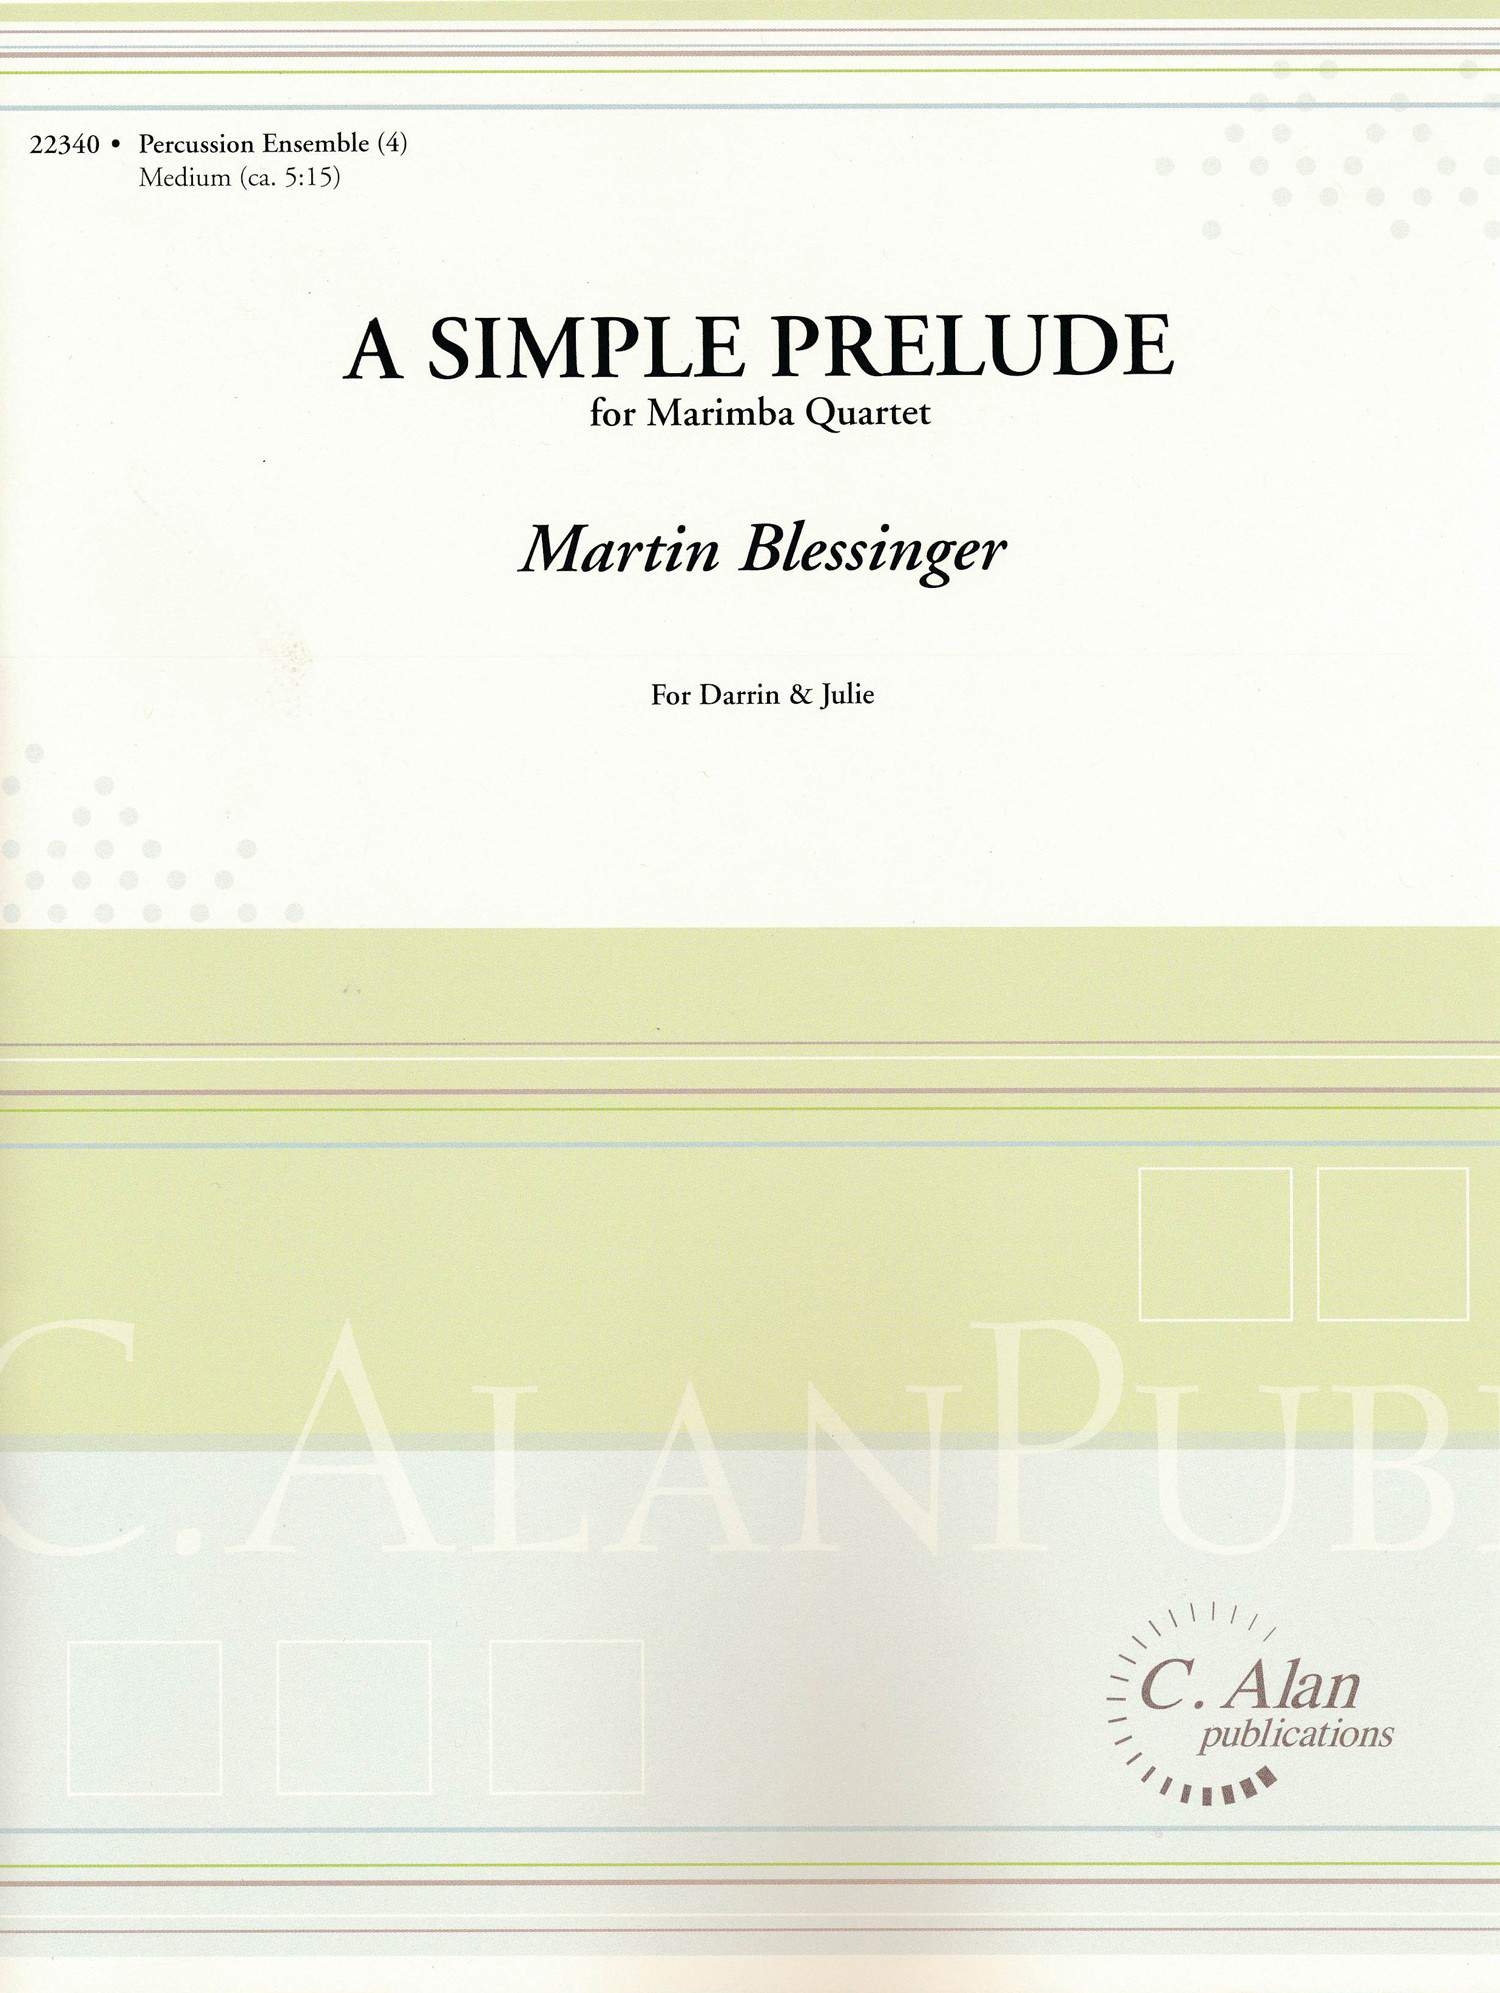 A Simple Prelude by Martin Blessinger